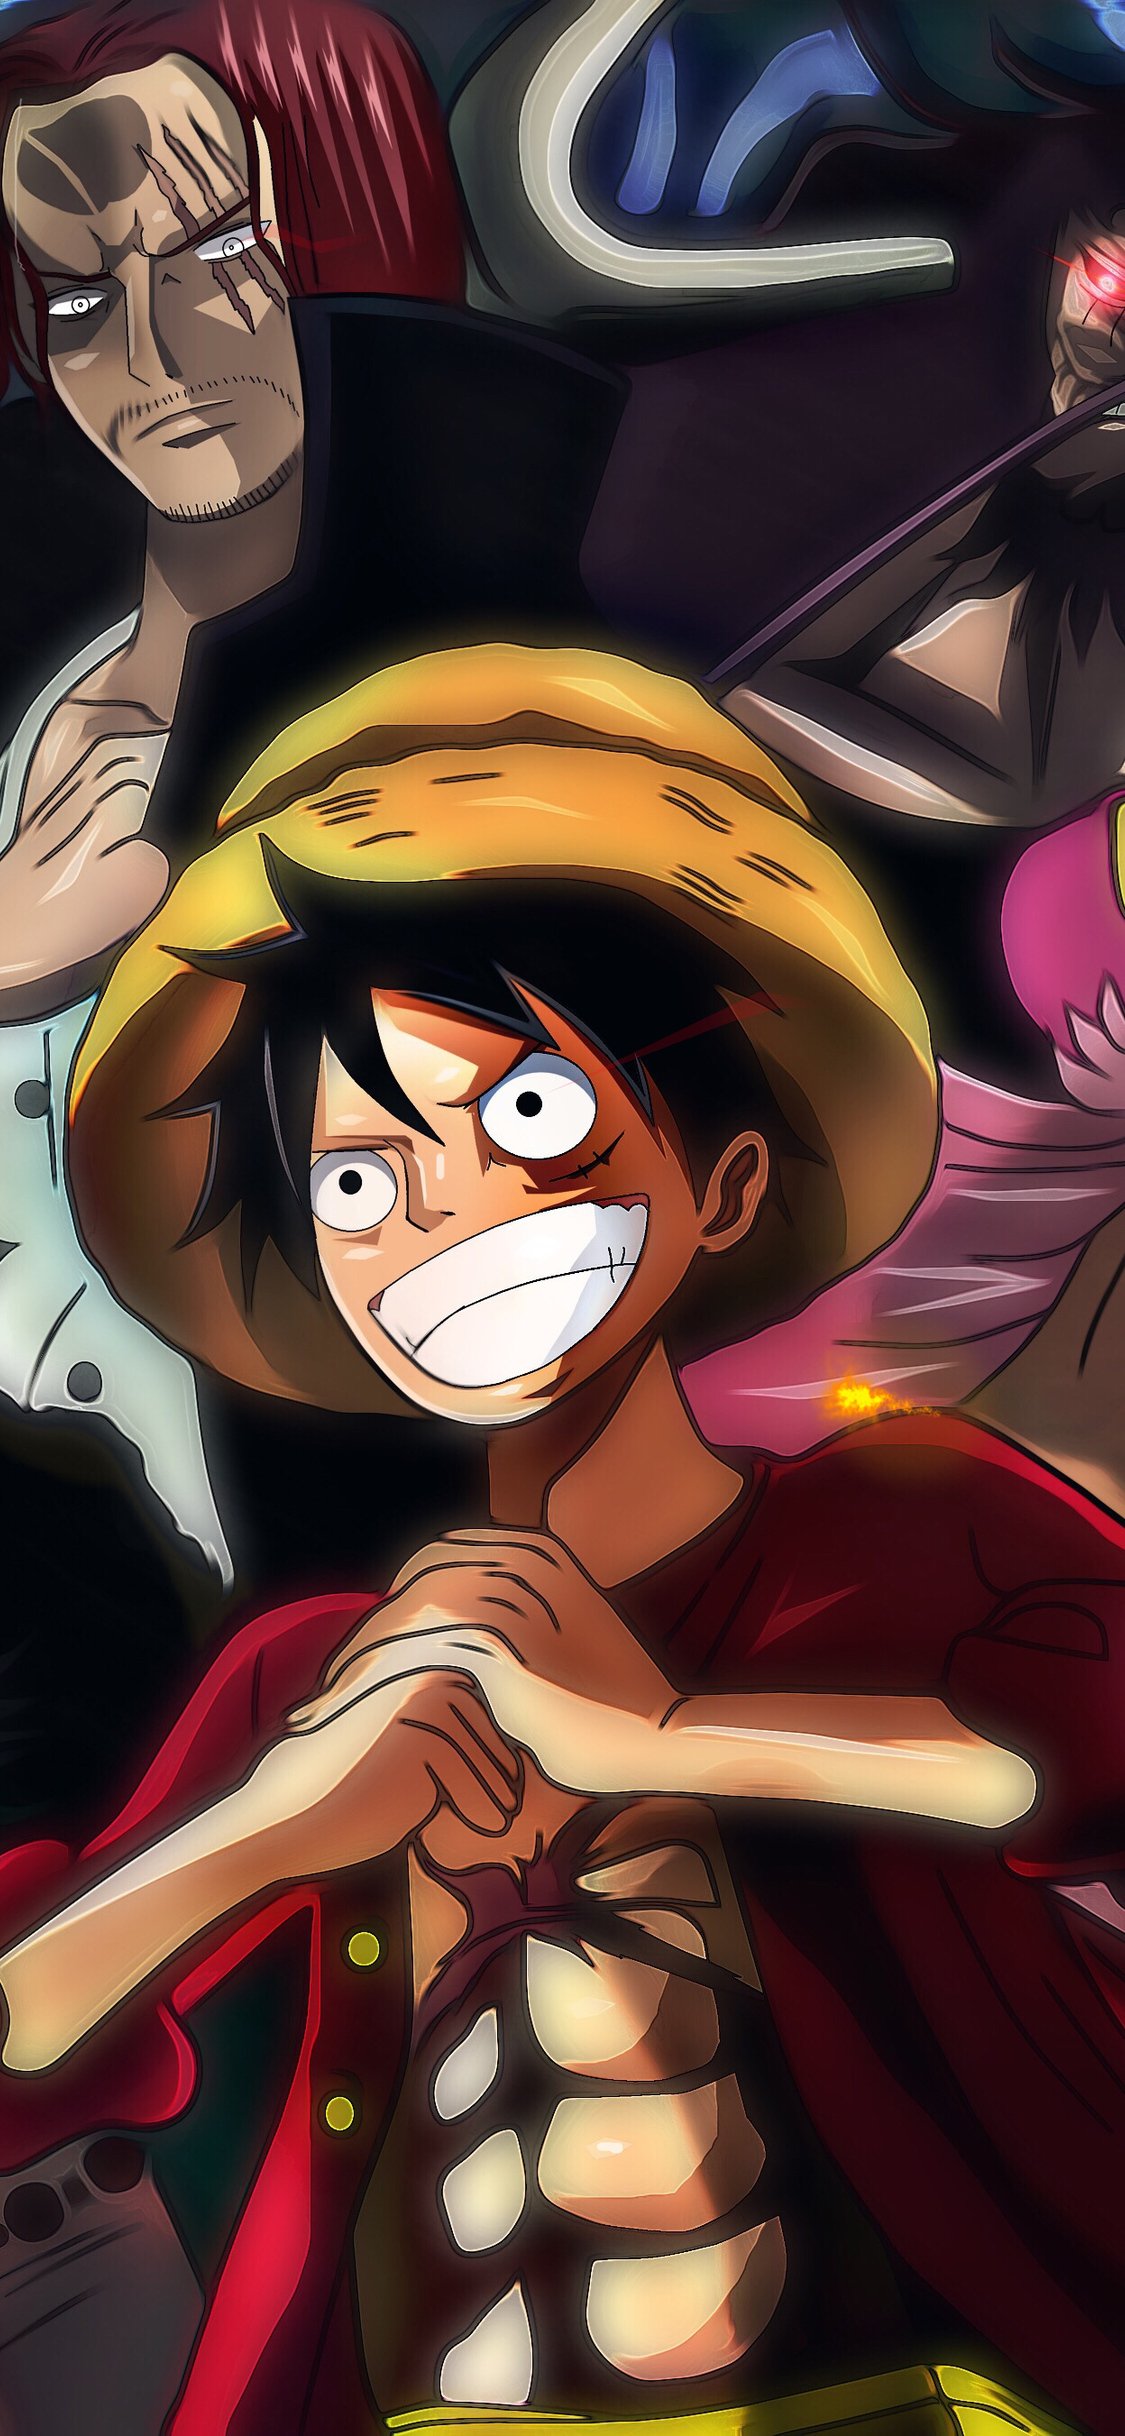 One Piece Wallpaper 4k For iPhone